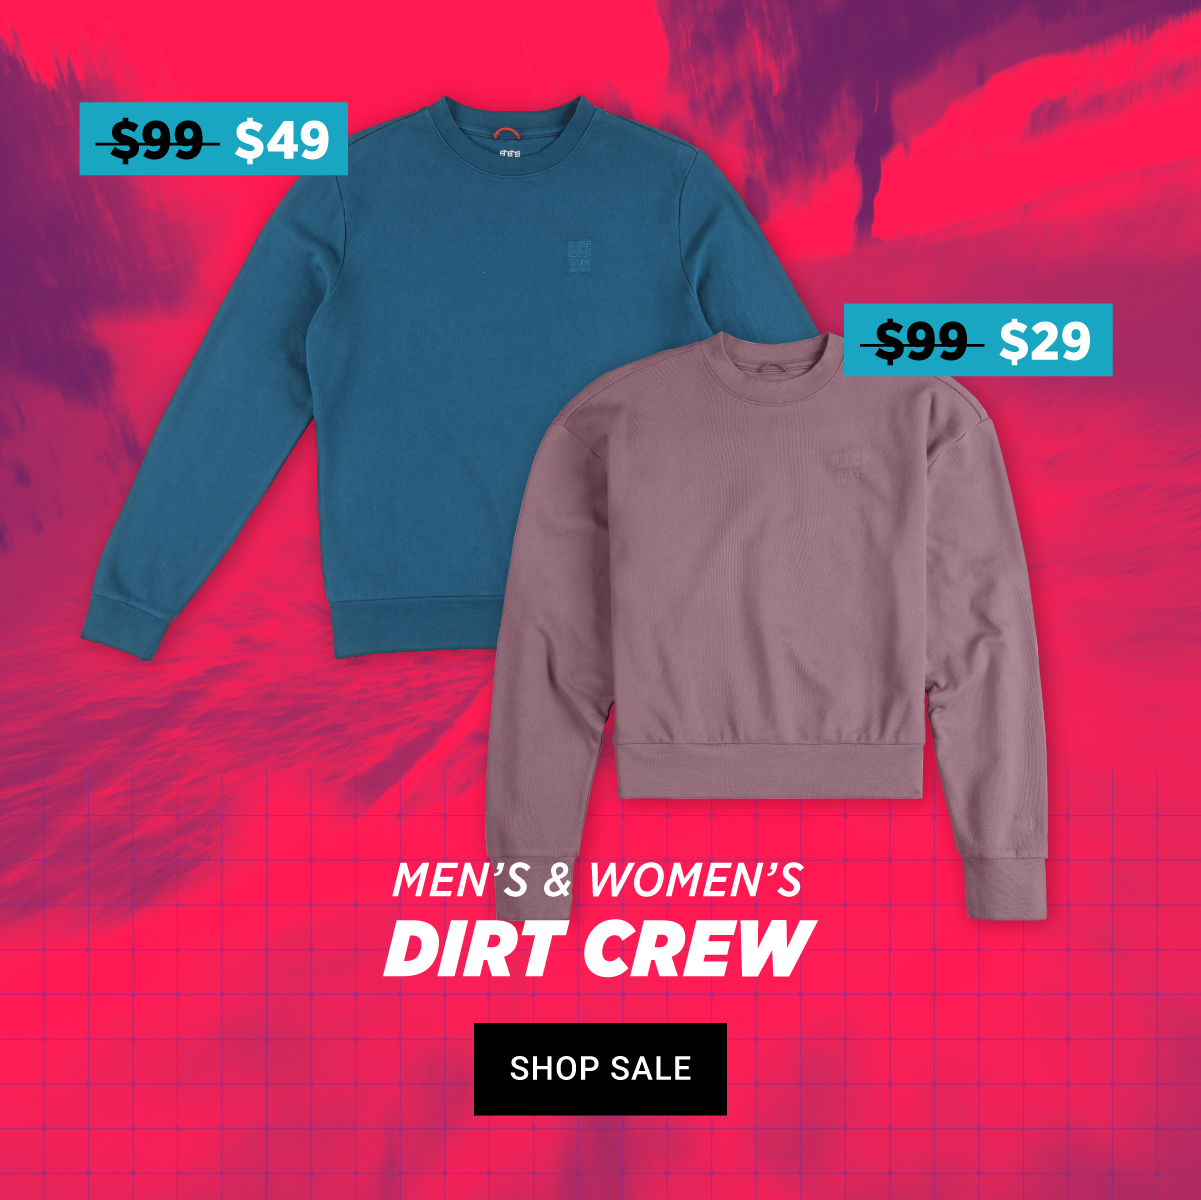 Dirt Crew - Up to 70% Off